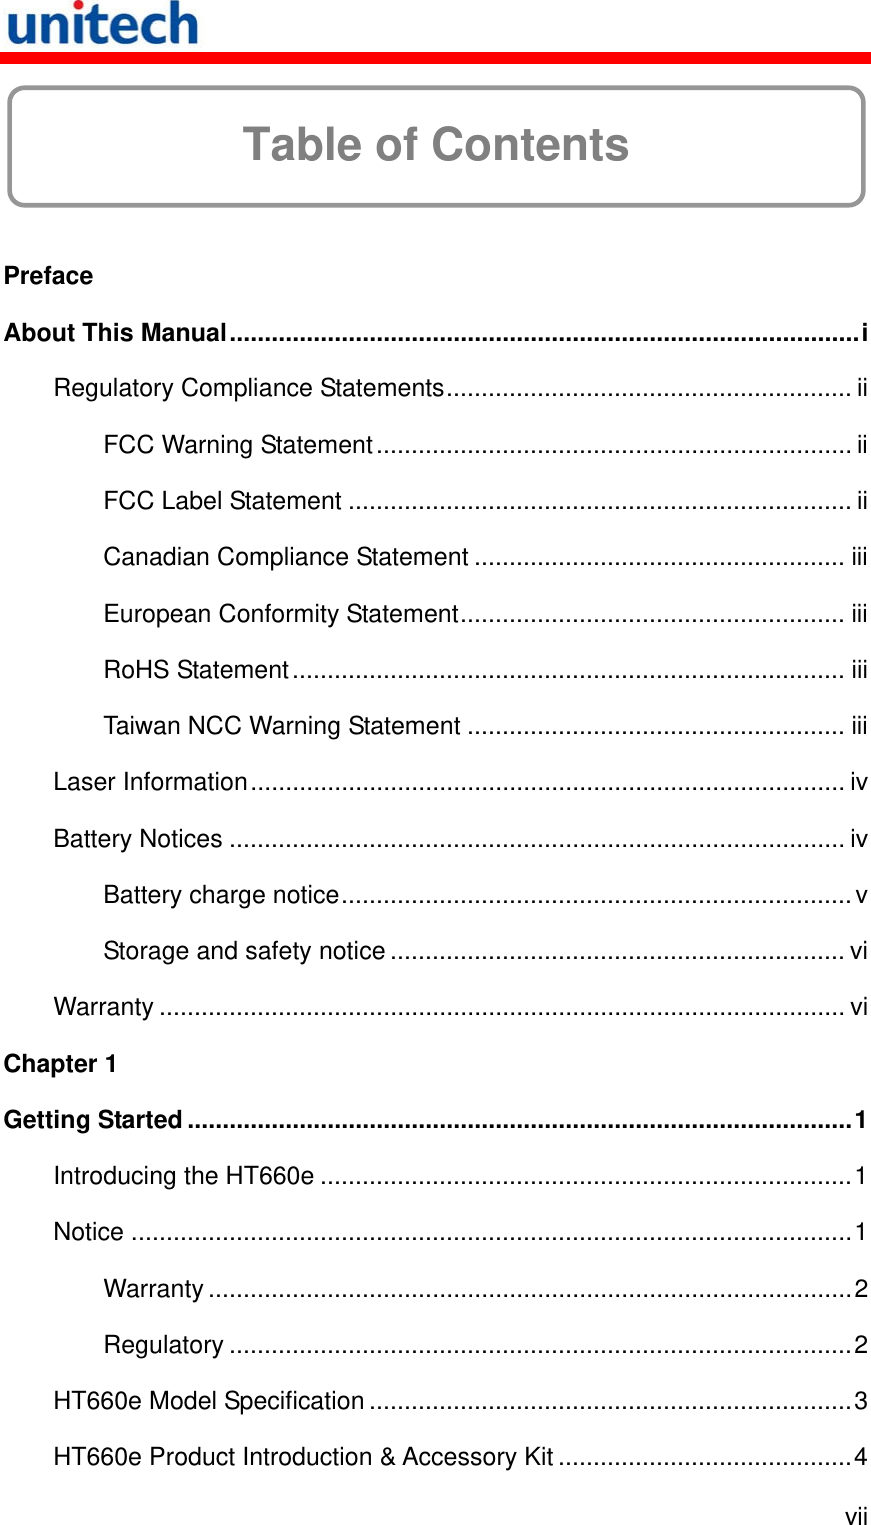   vii  Table of Contents  Preface About This Manual..........................................................................................i Regulatory Compliance Statements.......................................................... ii FCC Warning Statement.................................................................... ii FCC Label Statement ........................................................................ ii Canadian Compliance Statement ..................................................... iii European Conformity Statement....................................................... iii RoHS Statement............................................................................... iii Taiwan NCC Warning Statement ...................................................... iii Laser Information..................................................................................... iv Battery Notices ........................................................................................ iv Battery charge notice.........................................................................v Storage and safety notice ................................................................. vi Warranty .................................................................................................. vi Chapter 1 Getting Started ...............................................................................................1 Introducing the HT660e ............................................................................1 Notice .......................................................................................................1 Warranty............................................................................................2 Regulatory .........................................................................................2 HT660e Model Specification .....................................................................3 HT660e Product Introduction &amp; Accessory Kit ..........................................4 